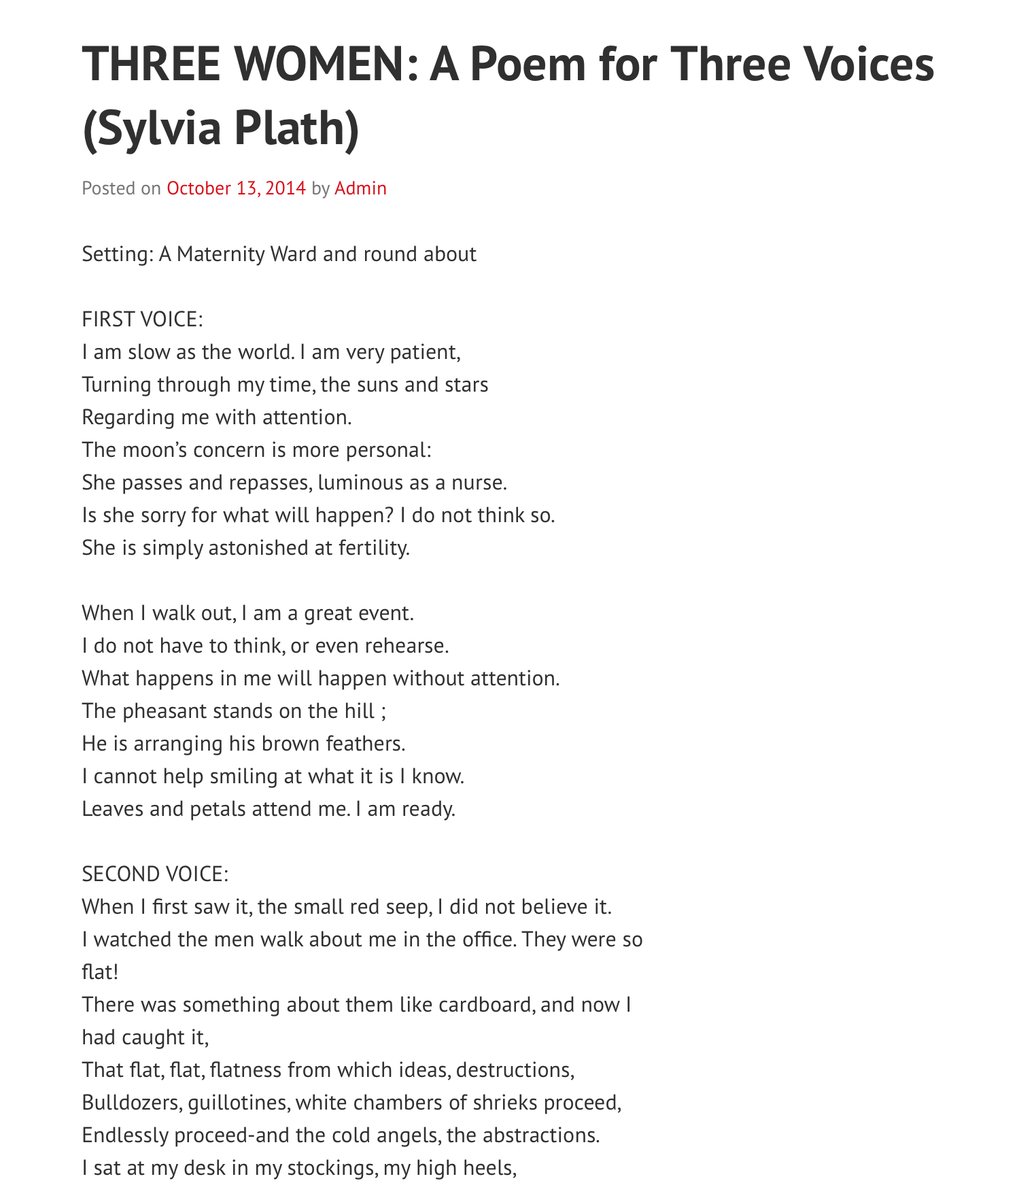 For those struggling to be mothers, or to balance their motherhood with other aspects of their lives - or feel a sense of resentment/shame about it. You can read the whole of Plath’s poem here:  https://utmedhumanities.wordpress.com/2014/10/13/three-women-a-poem-for-three-voices-sylvia-plath/